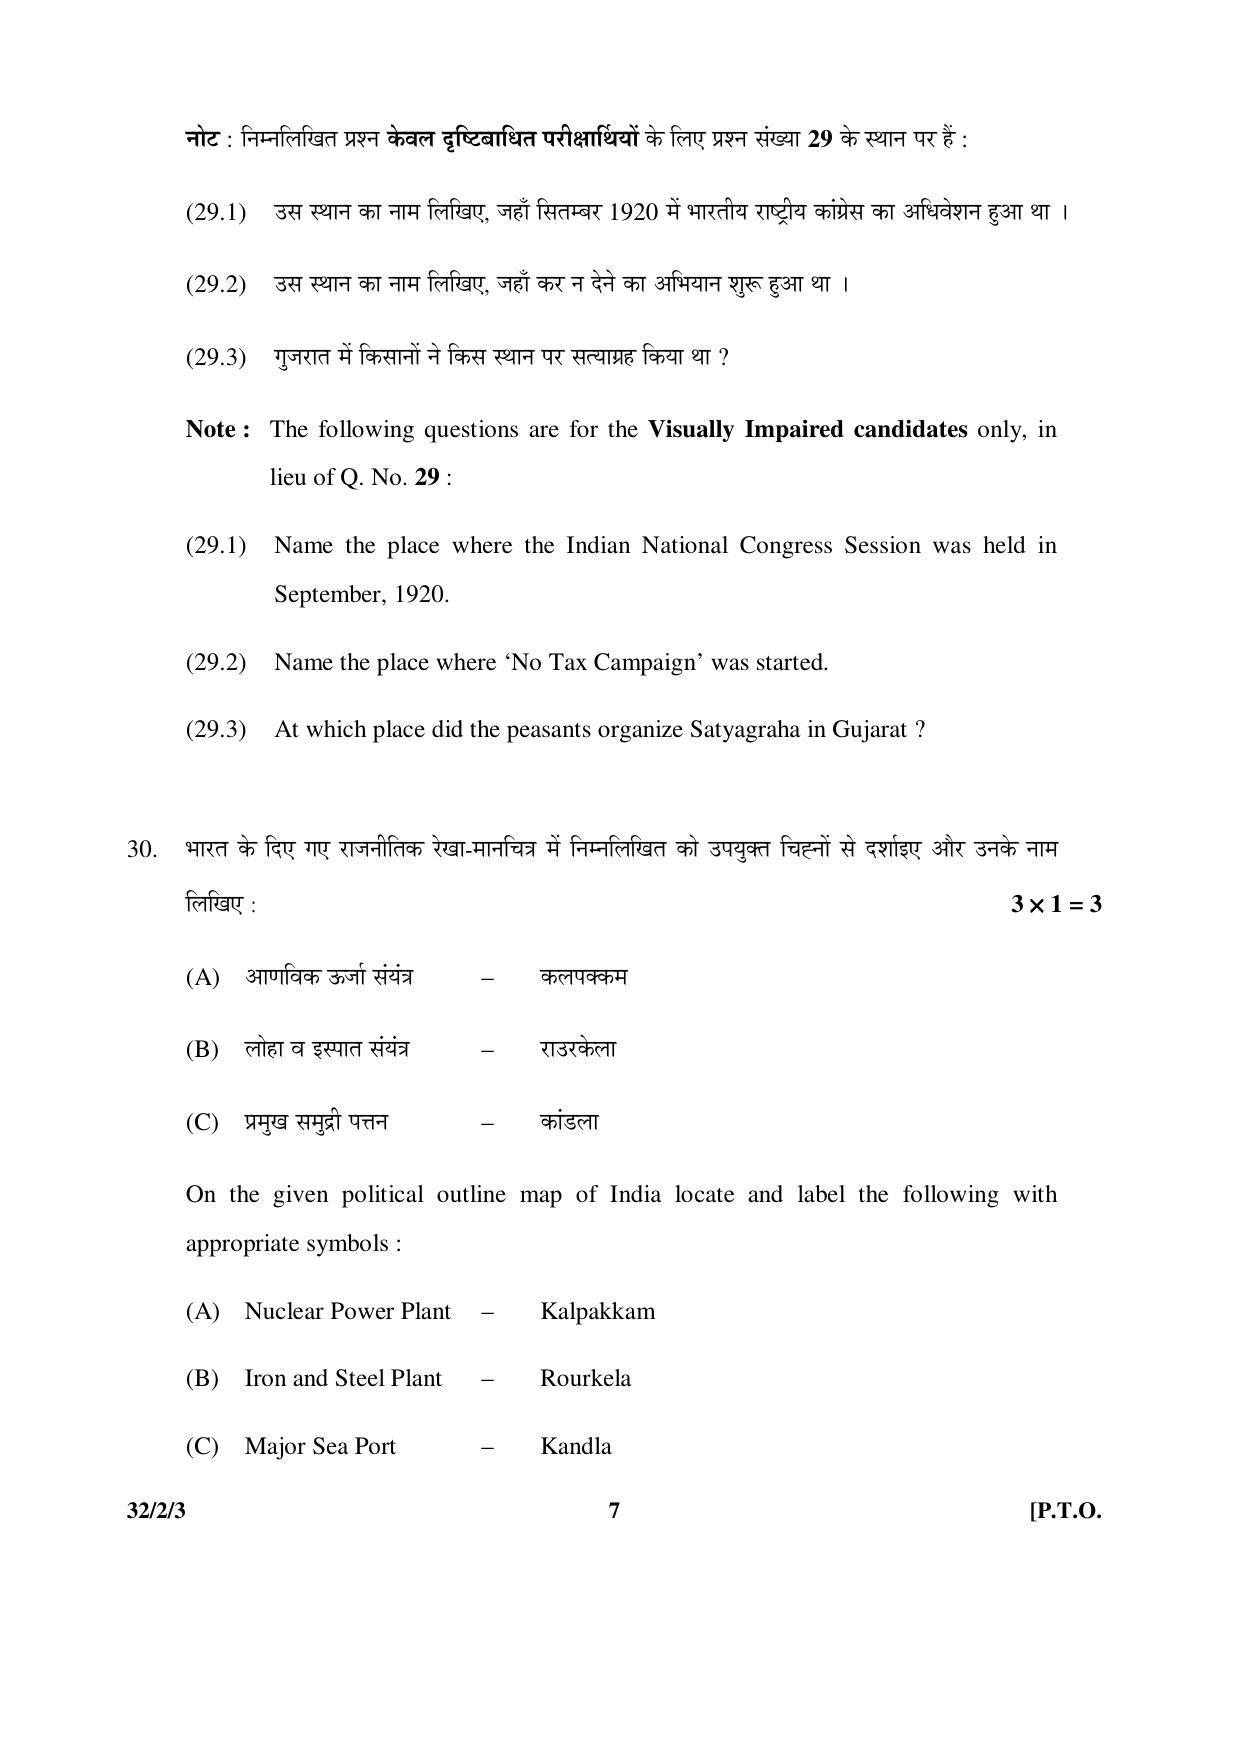 CBSE Class 10 32-2-3 _Social Science 2016 Question Paper - Page 7